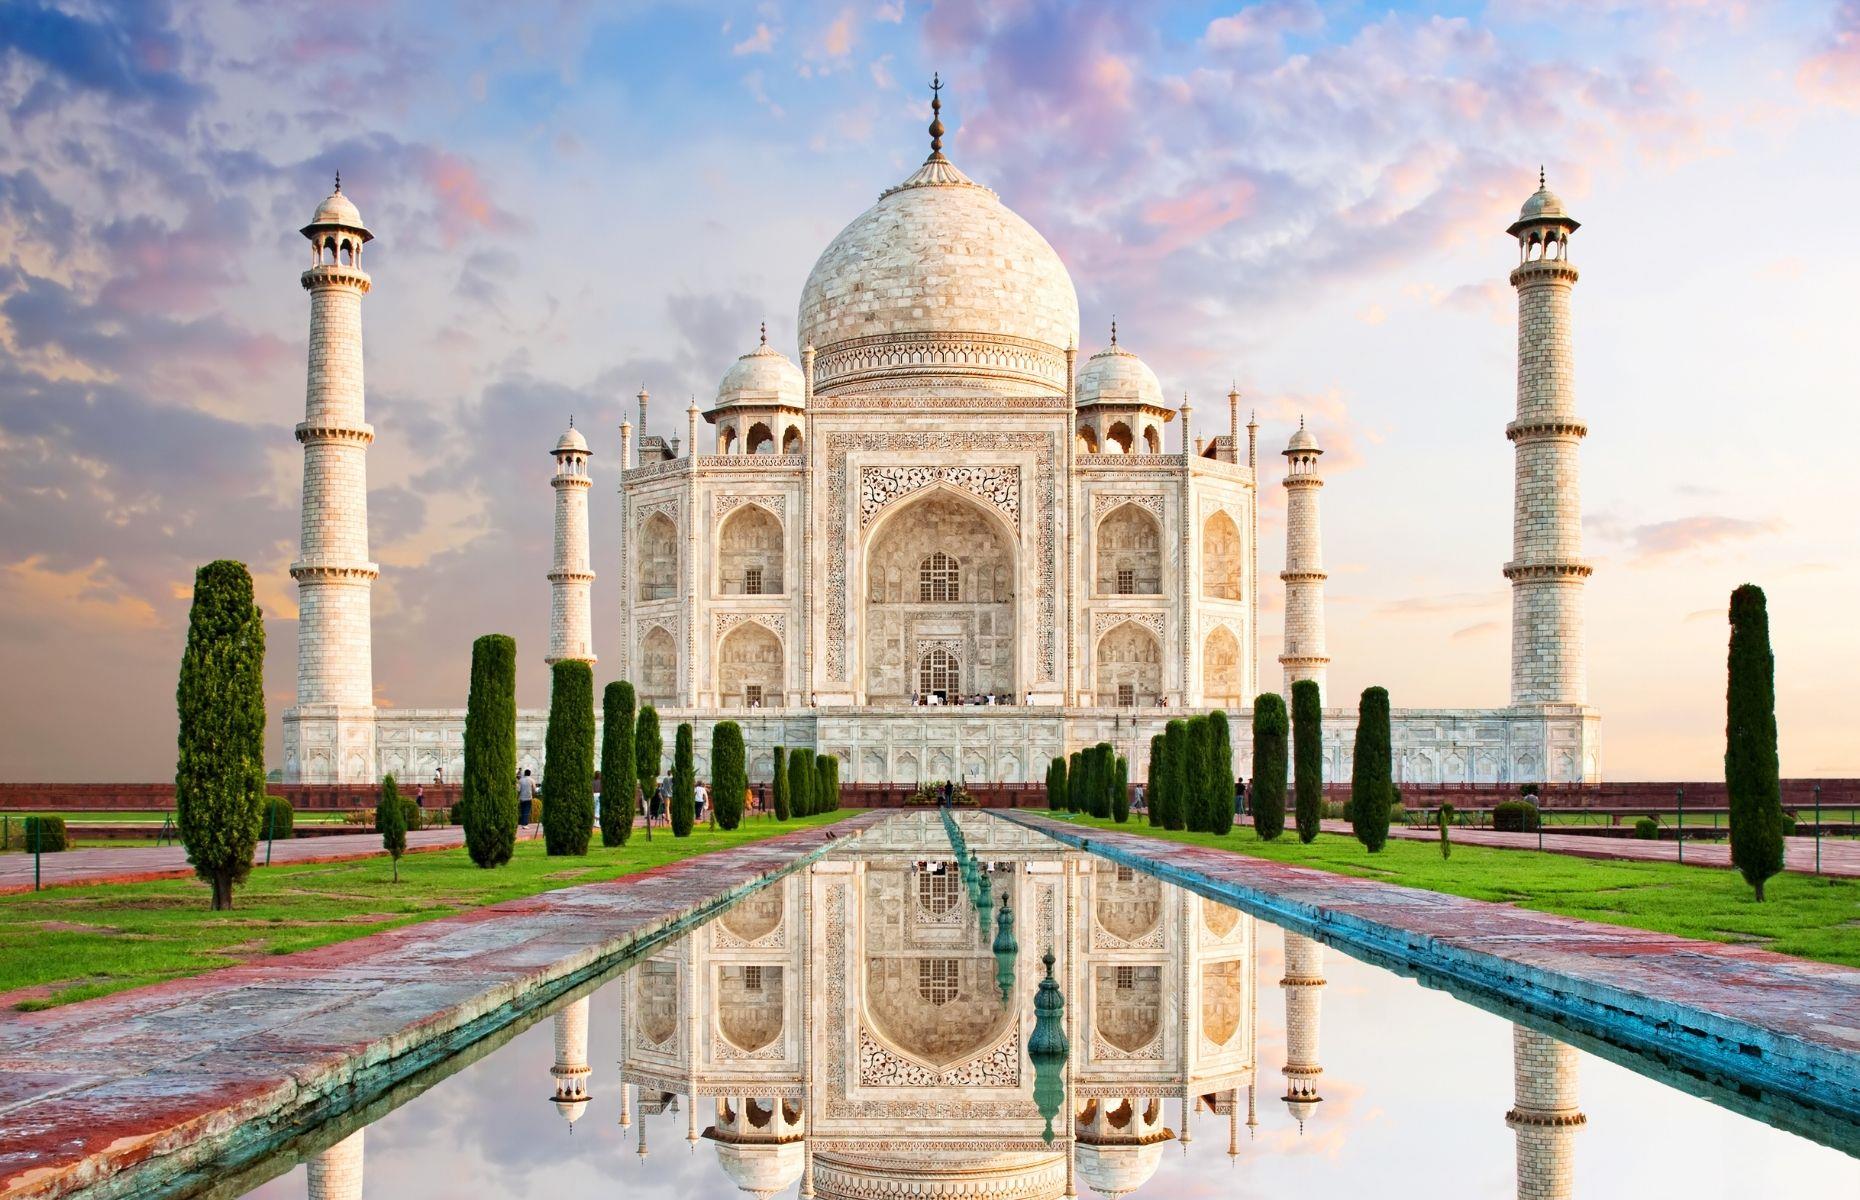 <p>As one of India's most famous landmarks, the Taj Mahal has to be seen to be believed. The spectacular, ultra-symmetrical marble mausoleum sits on the bank of the River Yamuna and normally attracts around eight million visitors a year. So, it's really no wonder that the 17th century monument is India's most-filmed spot. As well as appearing in a plethora of Bollywood hits, including <em>Jeans</em> and <em>Youngistaan</em>, the tomb can also be spotted in the Hollywood classic <em>Armageddon</em>.</p>